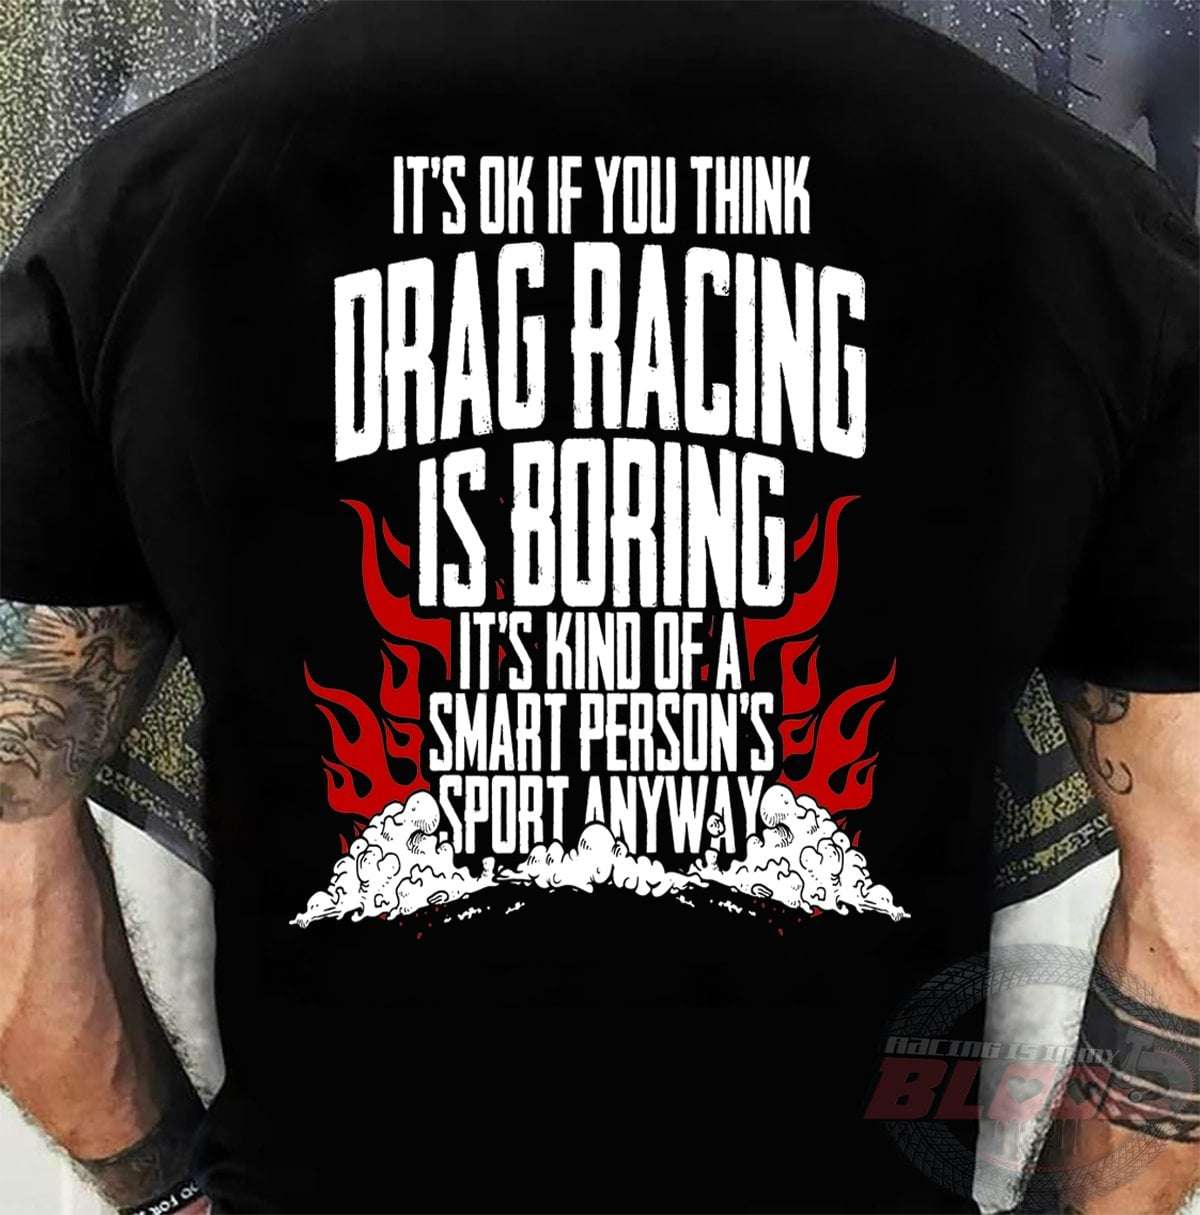 It's ok if you think drag racing is boring it's kind of a smart person's sport anyway